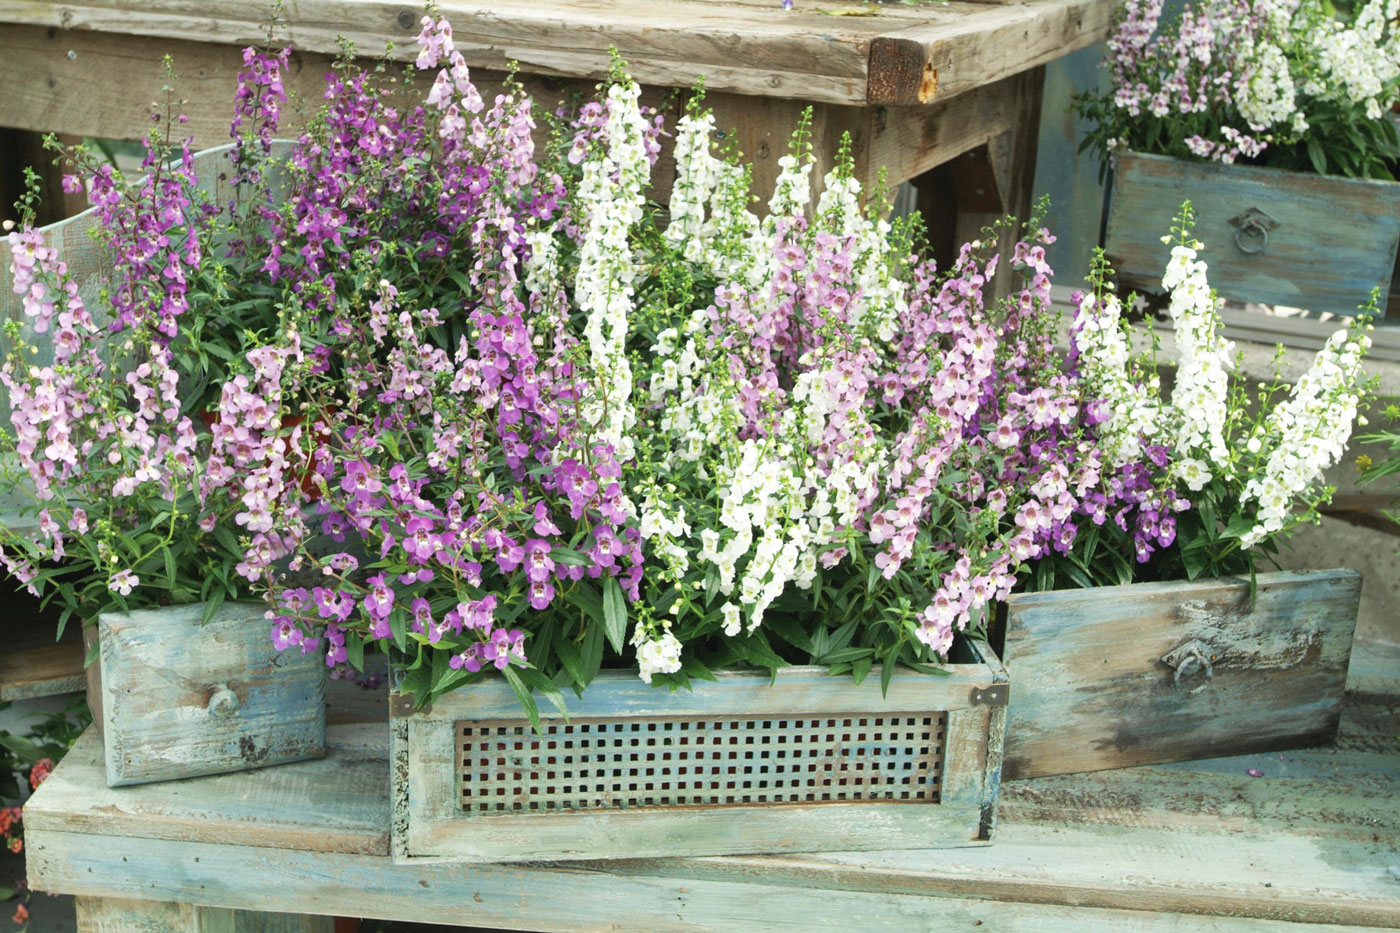 white, pink and purple colored flowers in a wooden box